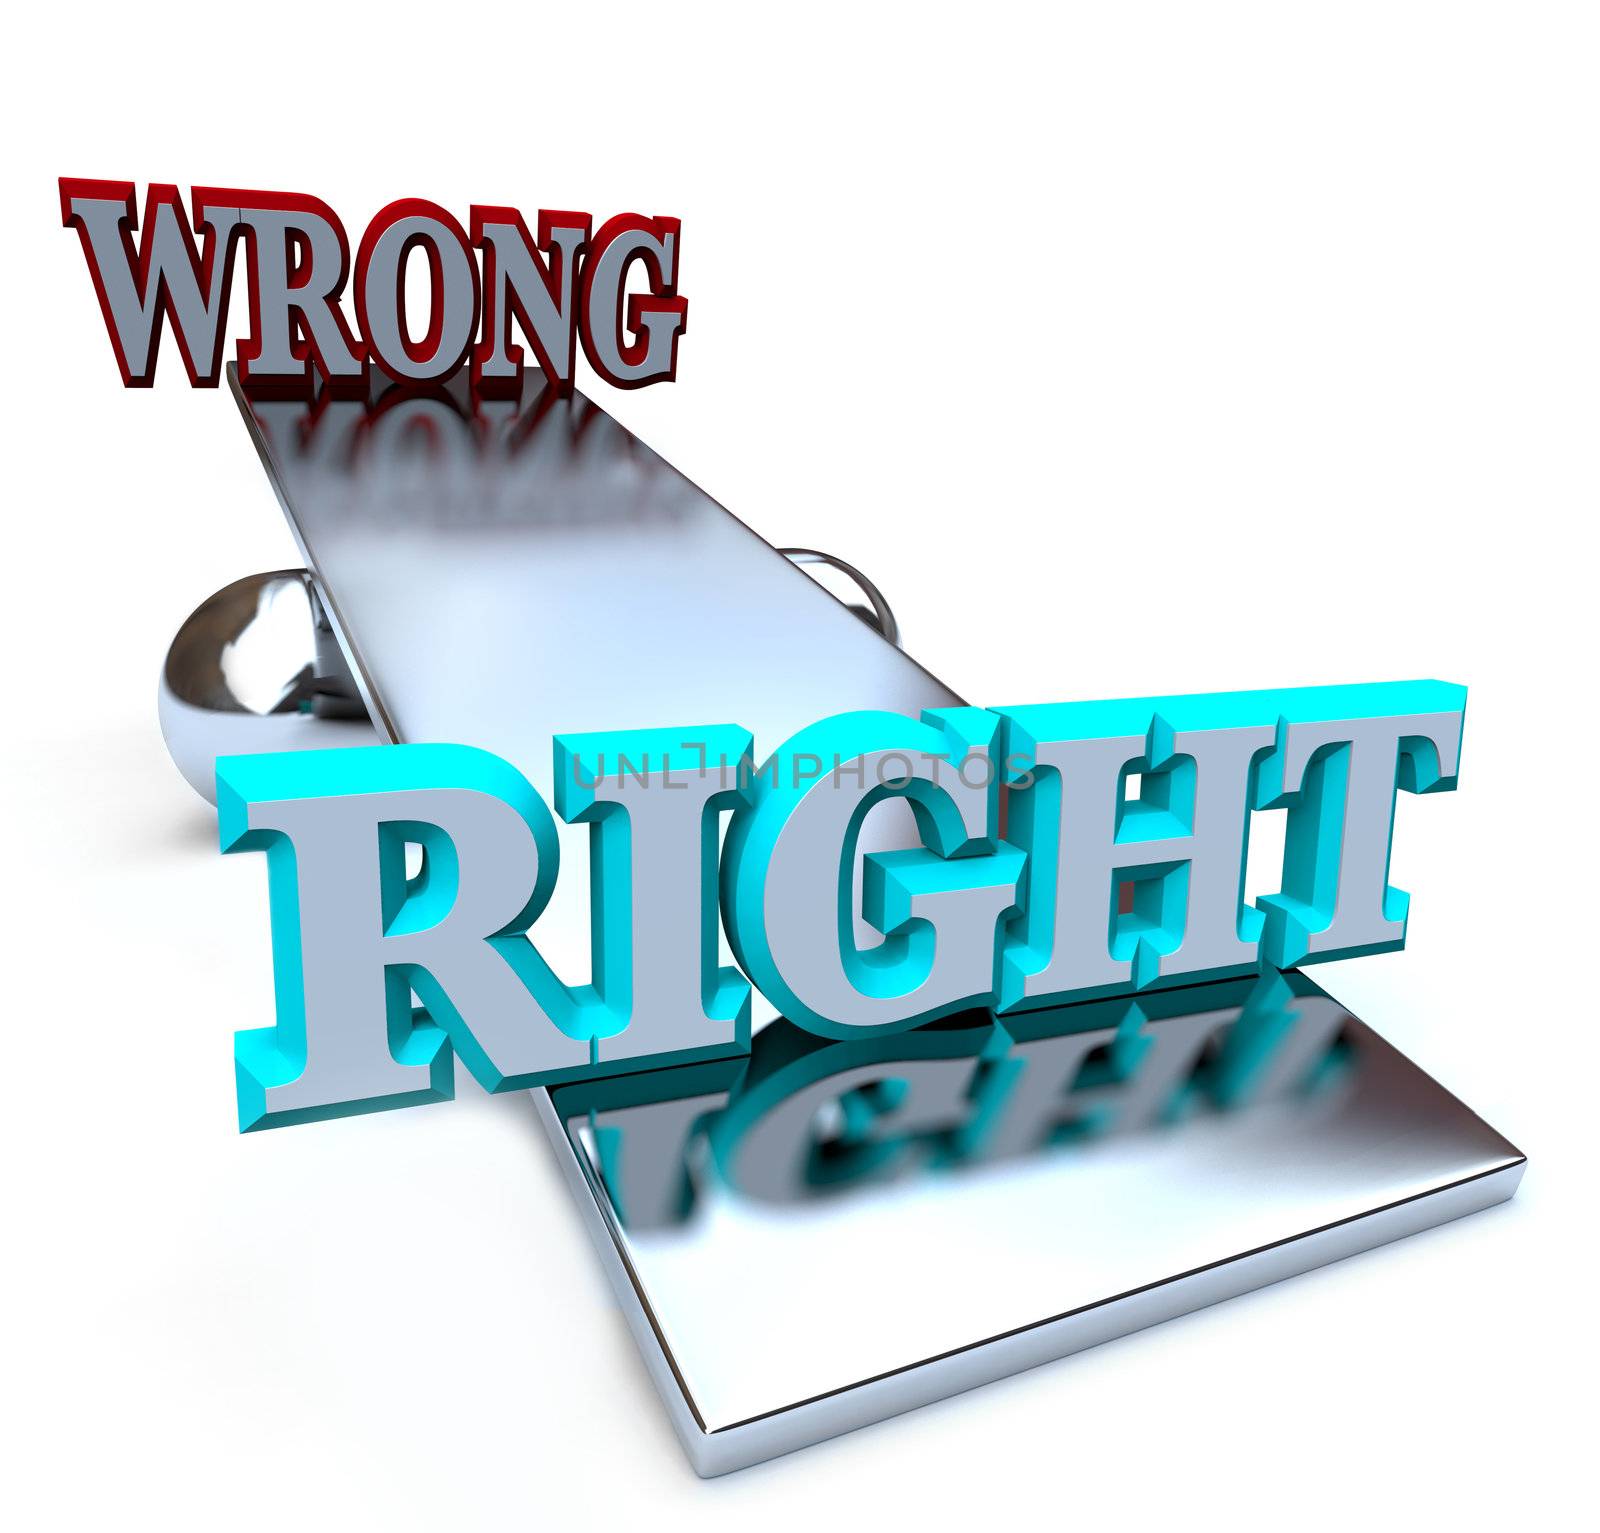 A see-saw balance tips in favor of doing right vs doing something wrong, weighing the options of these two moral choices